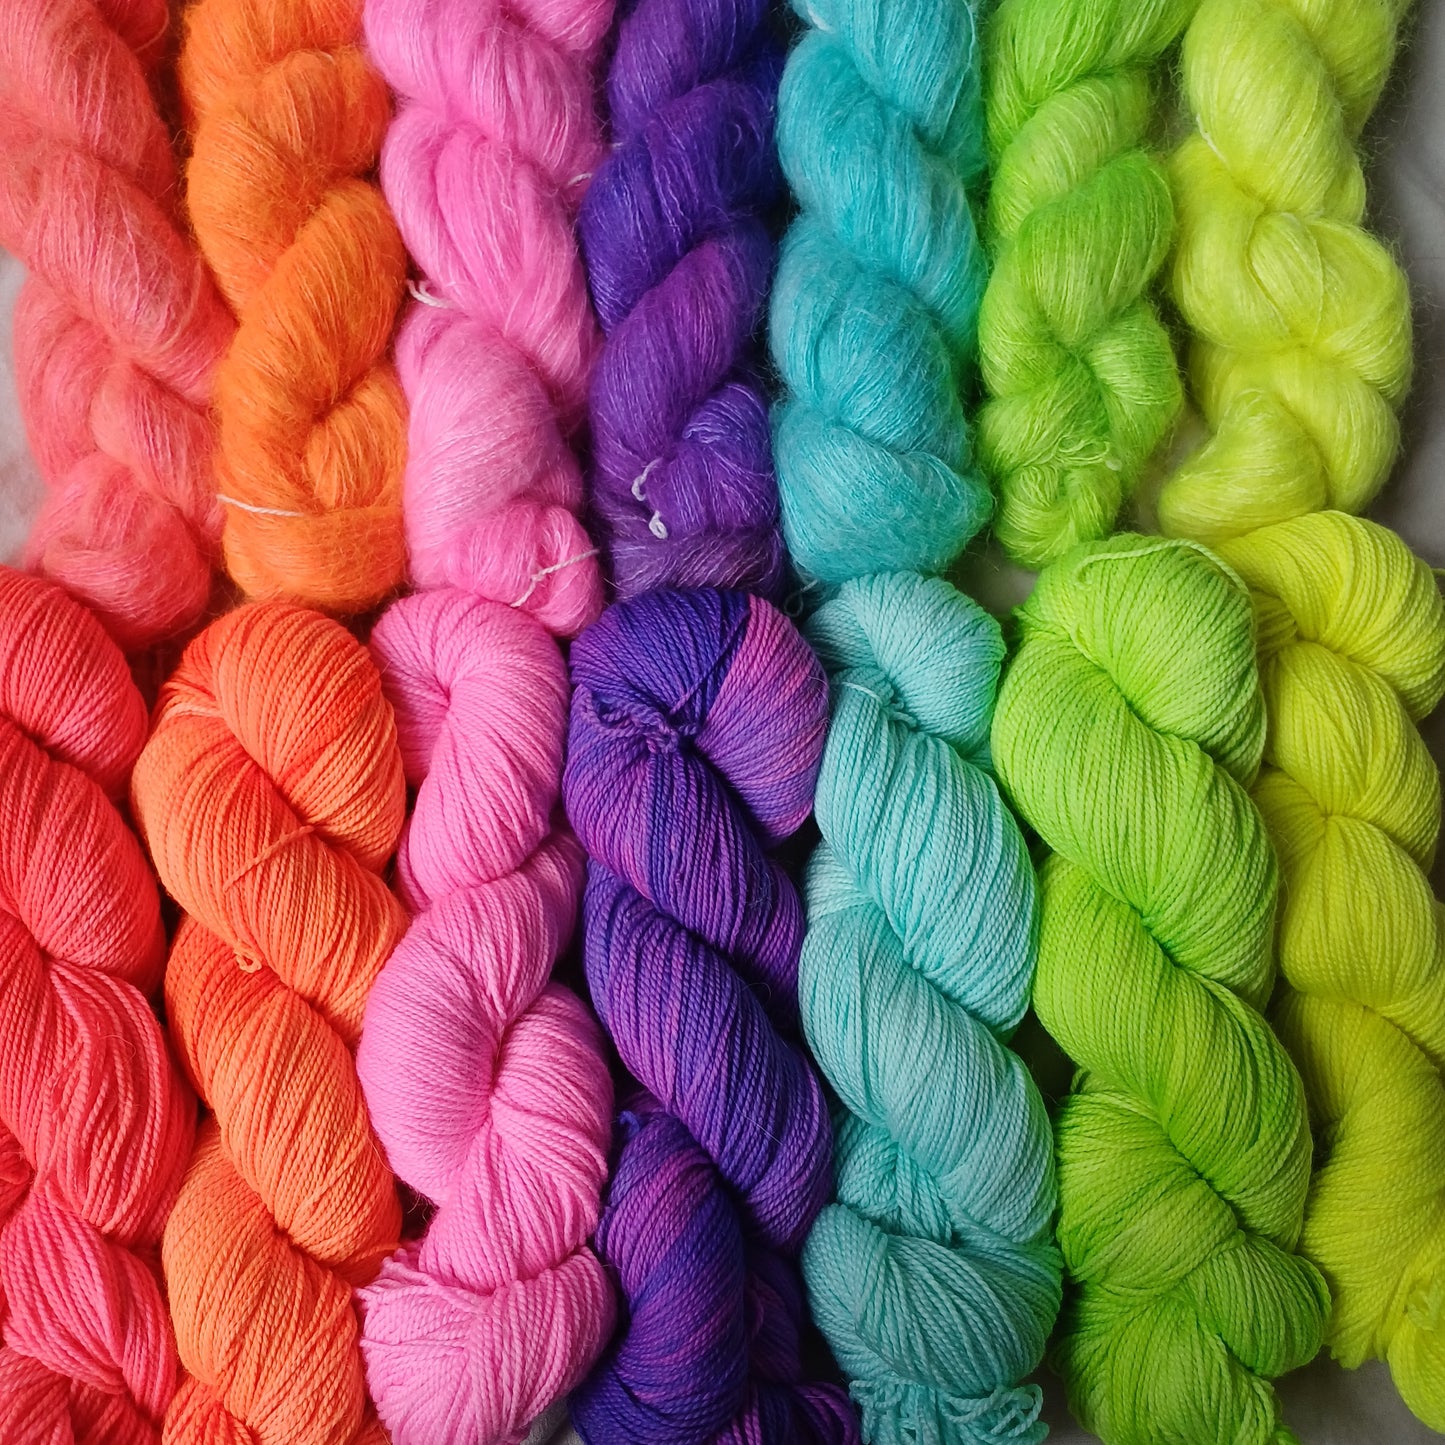 The Neon Edit "Twilight Rave" in Frog Mouse Twisty Sock